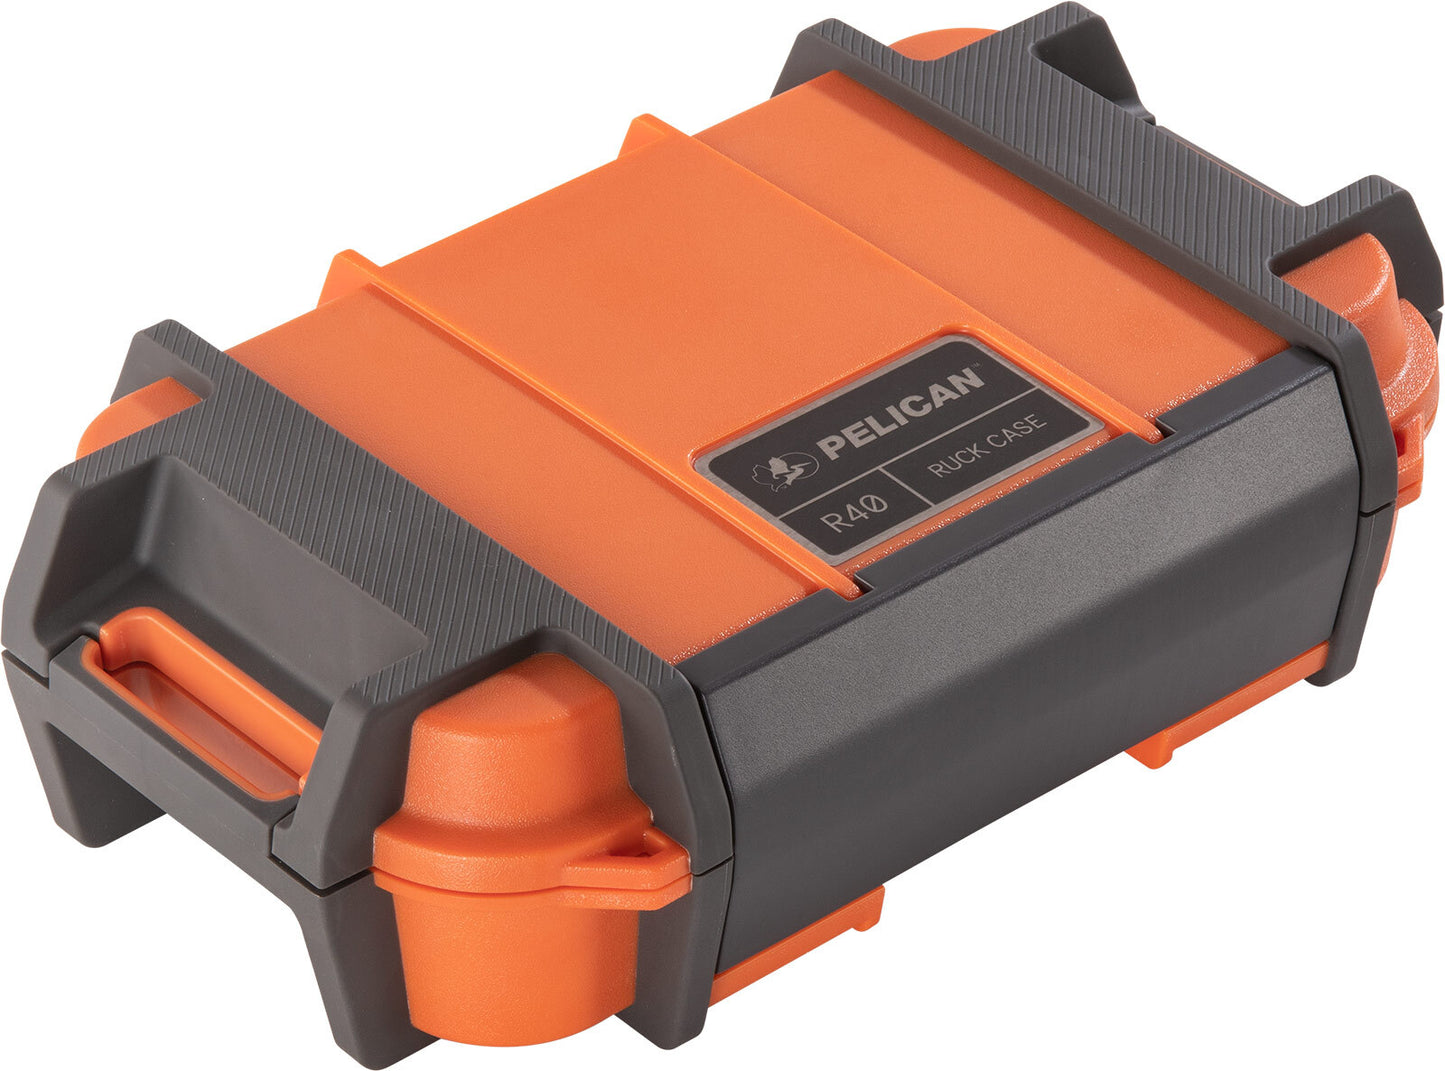 PELICAN RUCK CASE R40 PERSONAL UTILITY